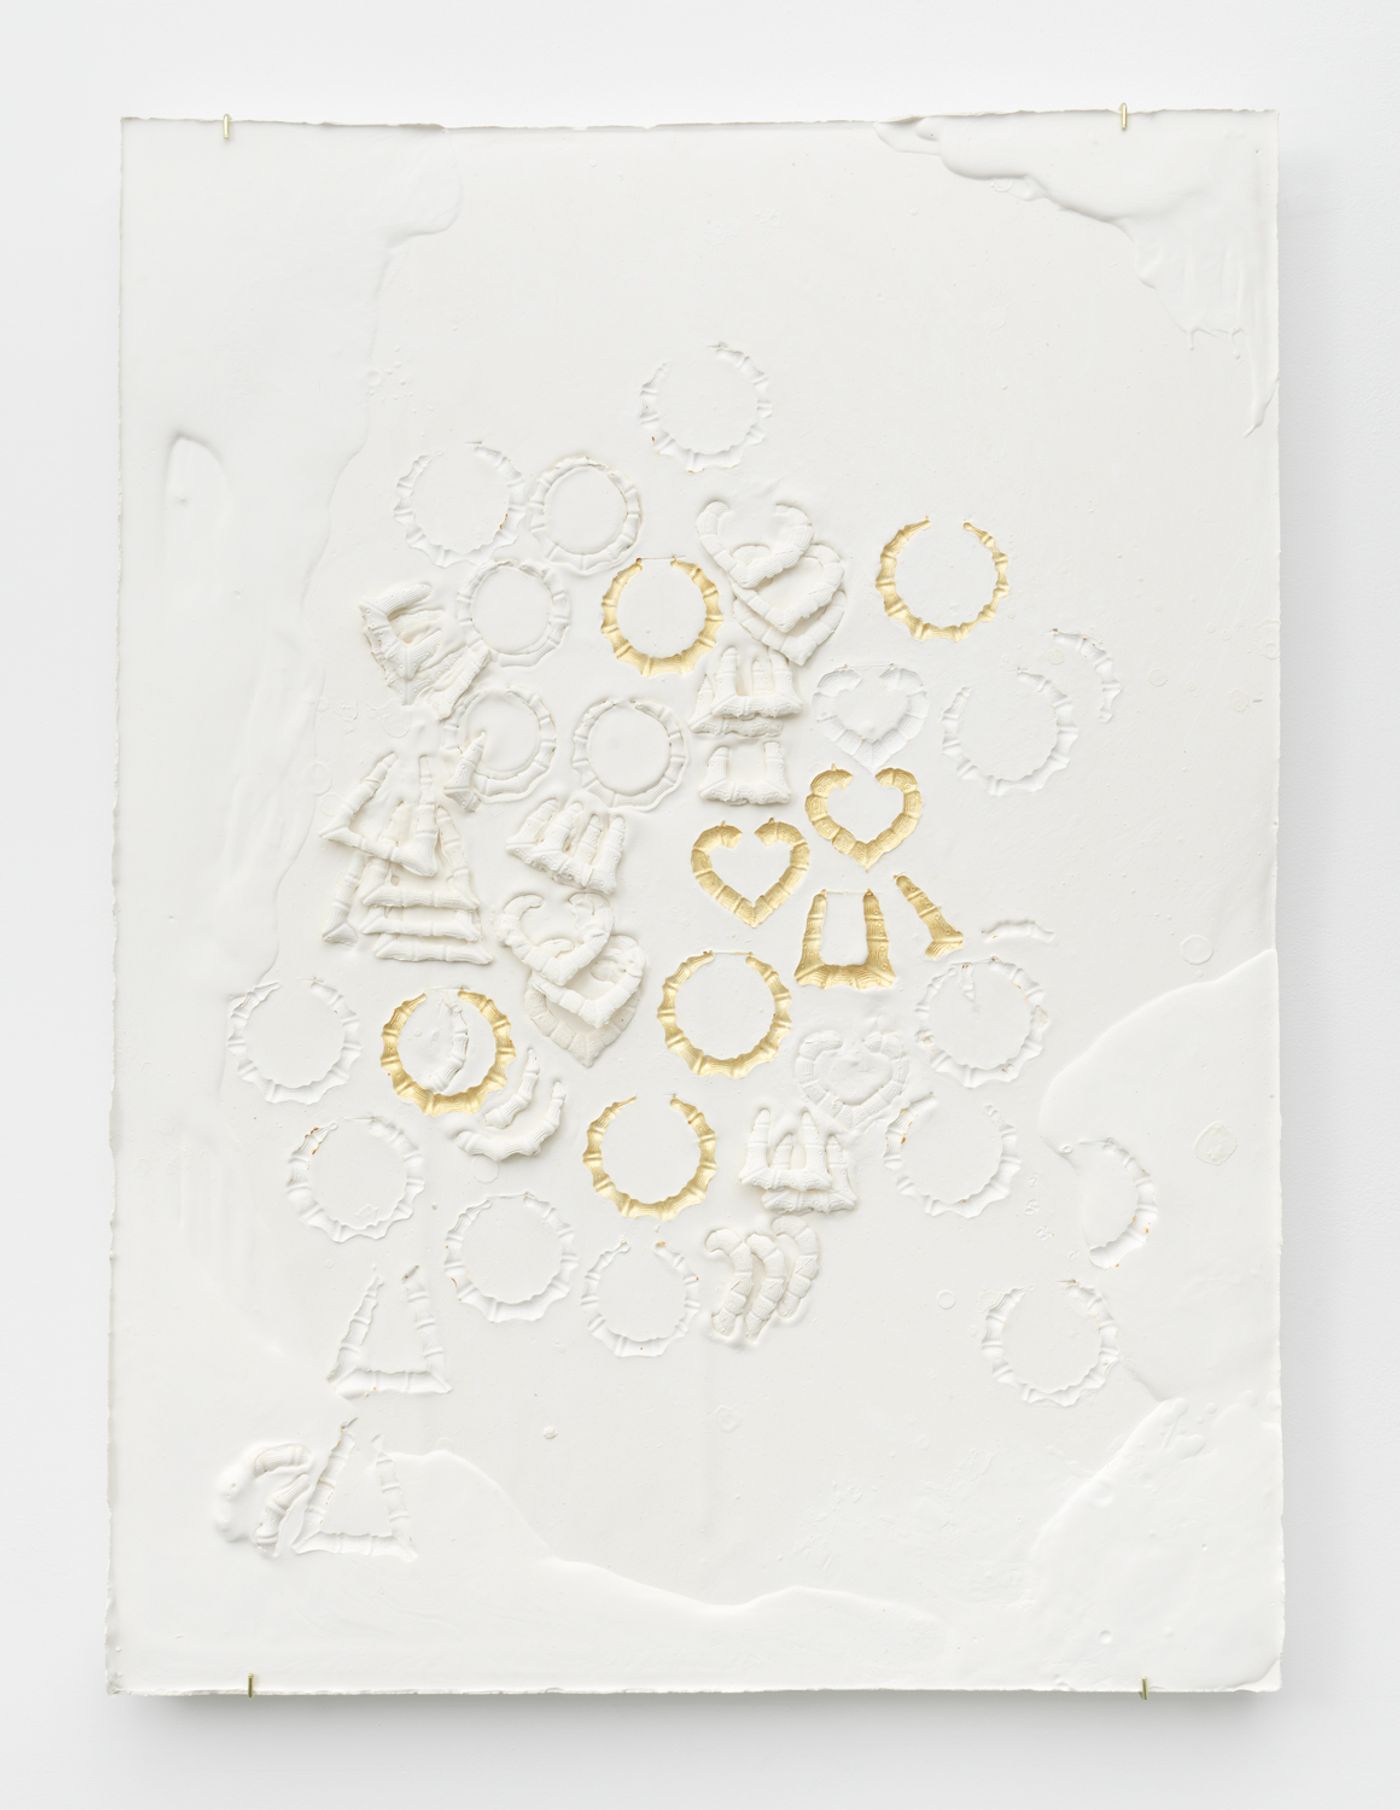 Image of Composition with Round Heart and Triangle Bamboo Earrings, Impressed with Gold, 2019: Plaster, foam, and acrylic